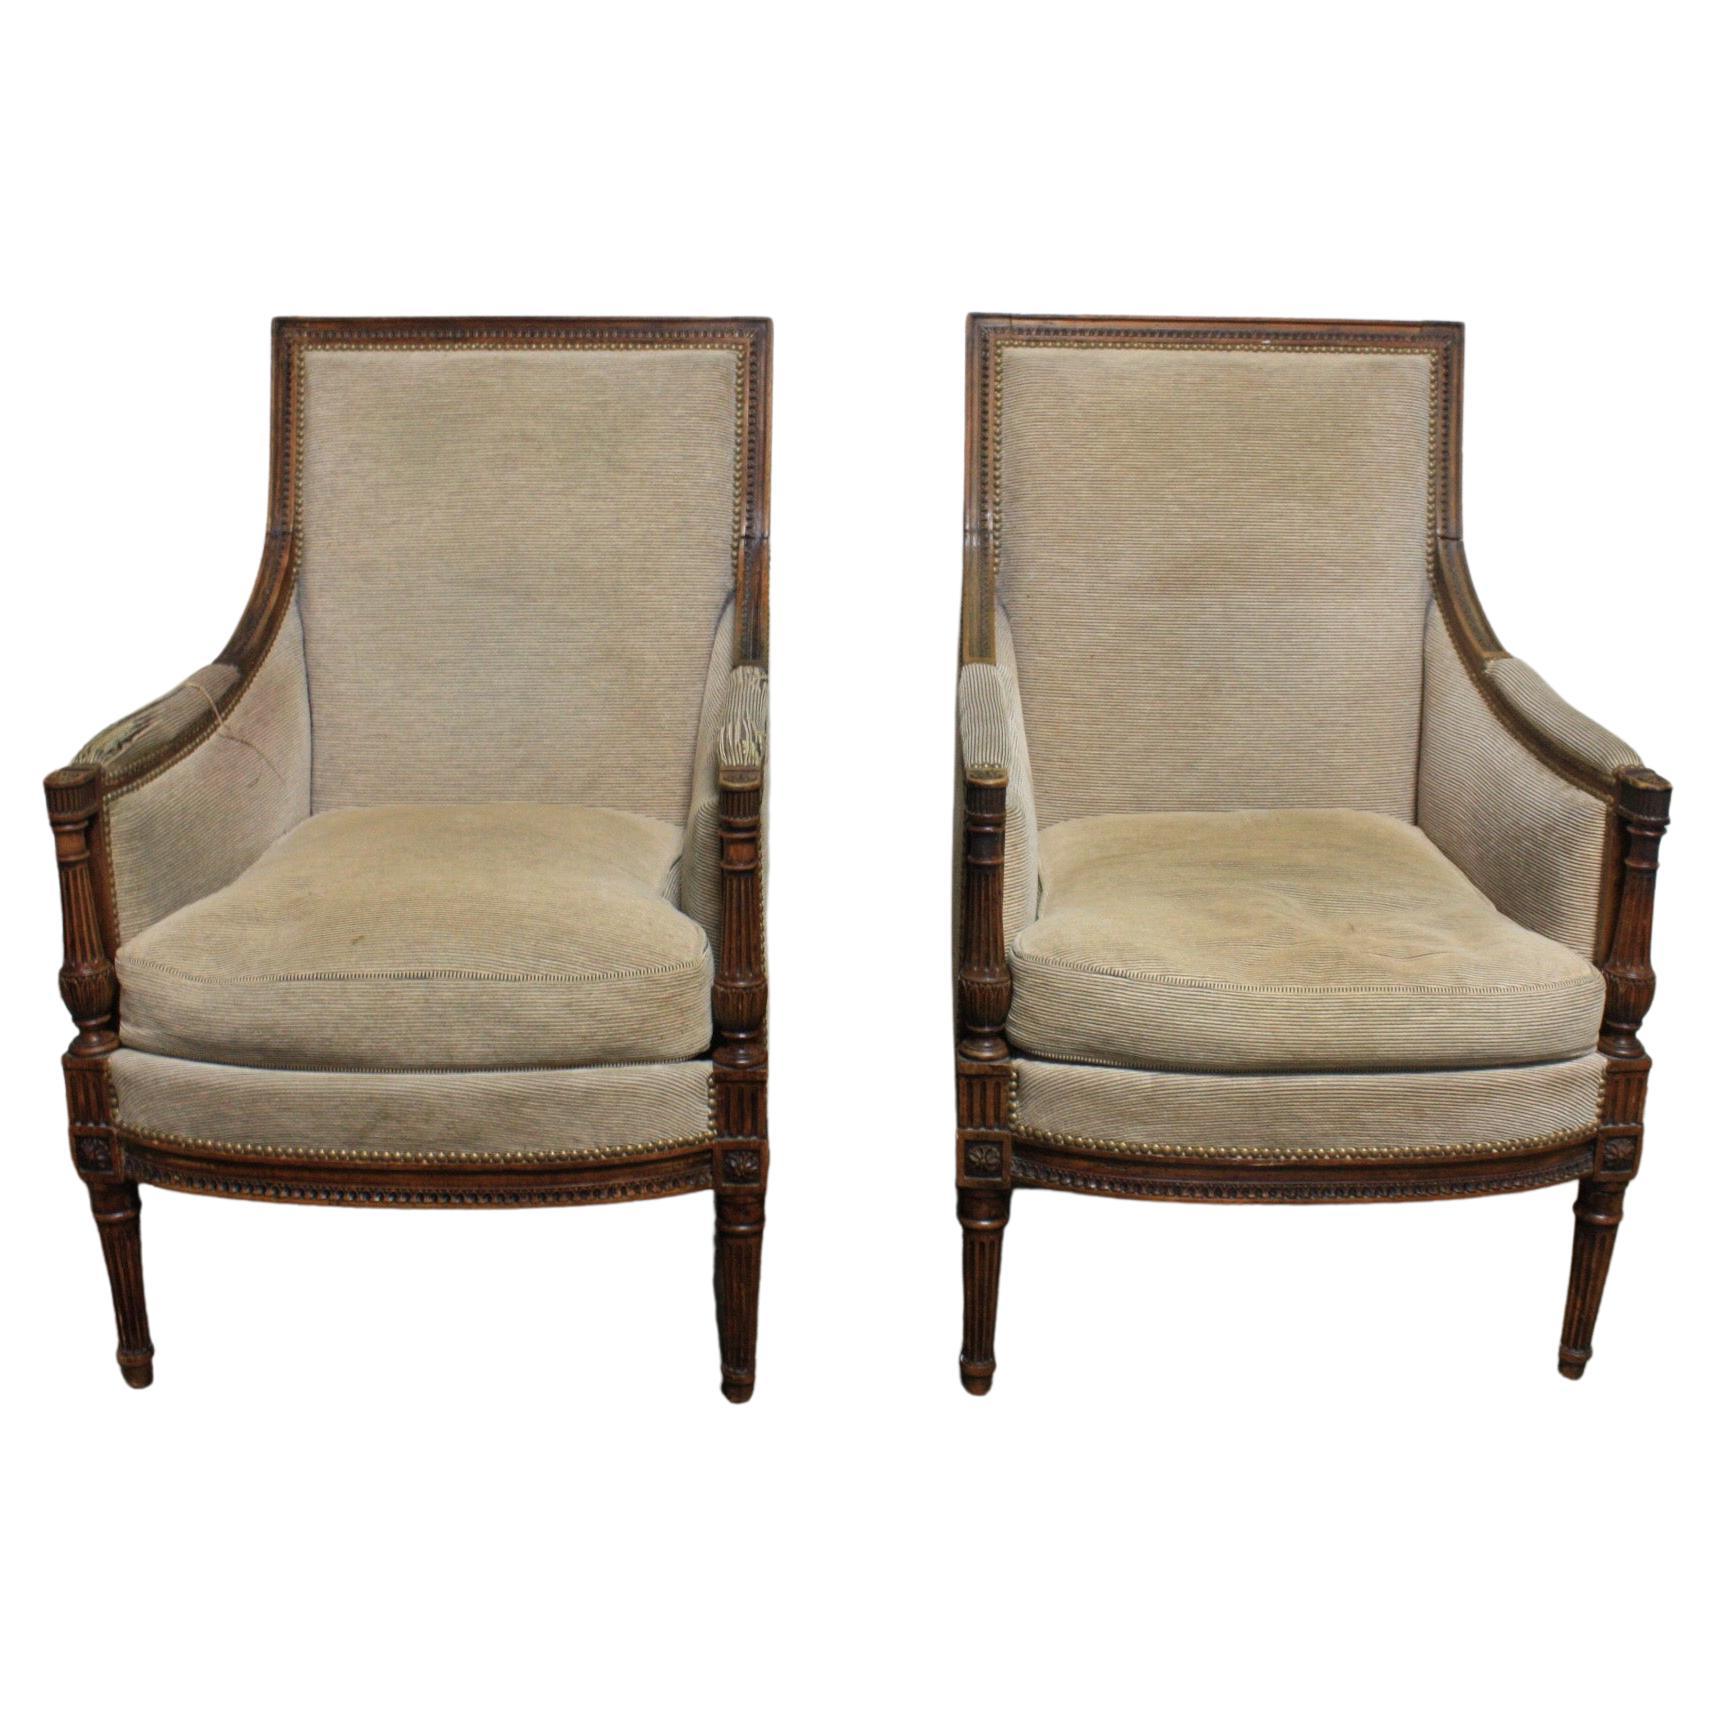 Late 19th Century French Pair of Bergere Chairs